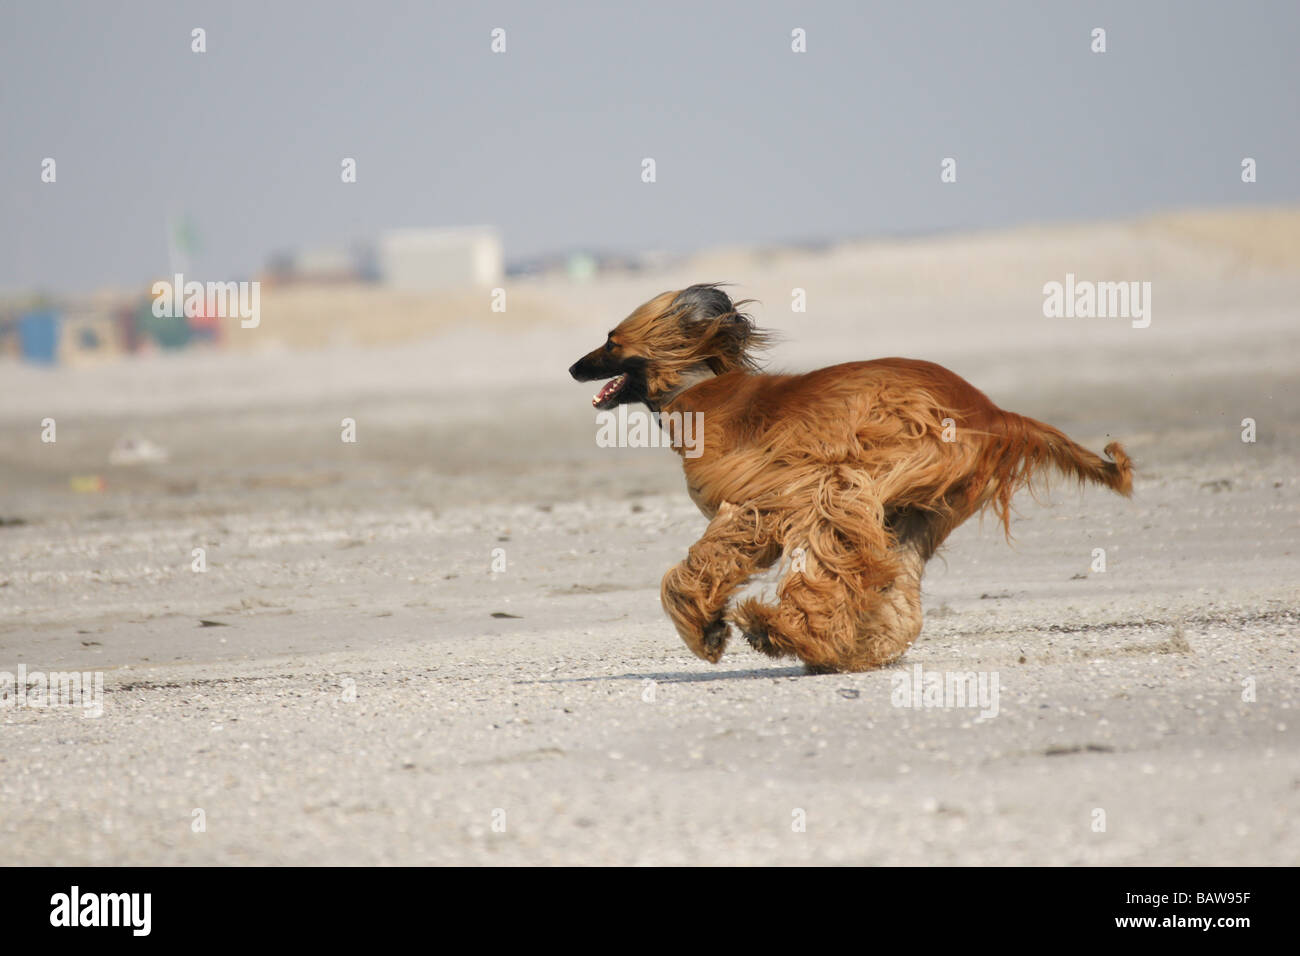 Yellow long fur afghan hound dog running fast at sand beach Stock Photo